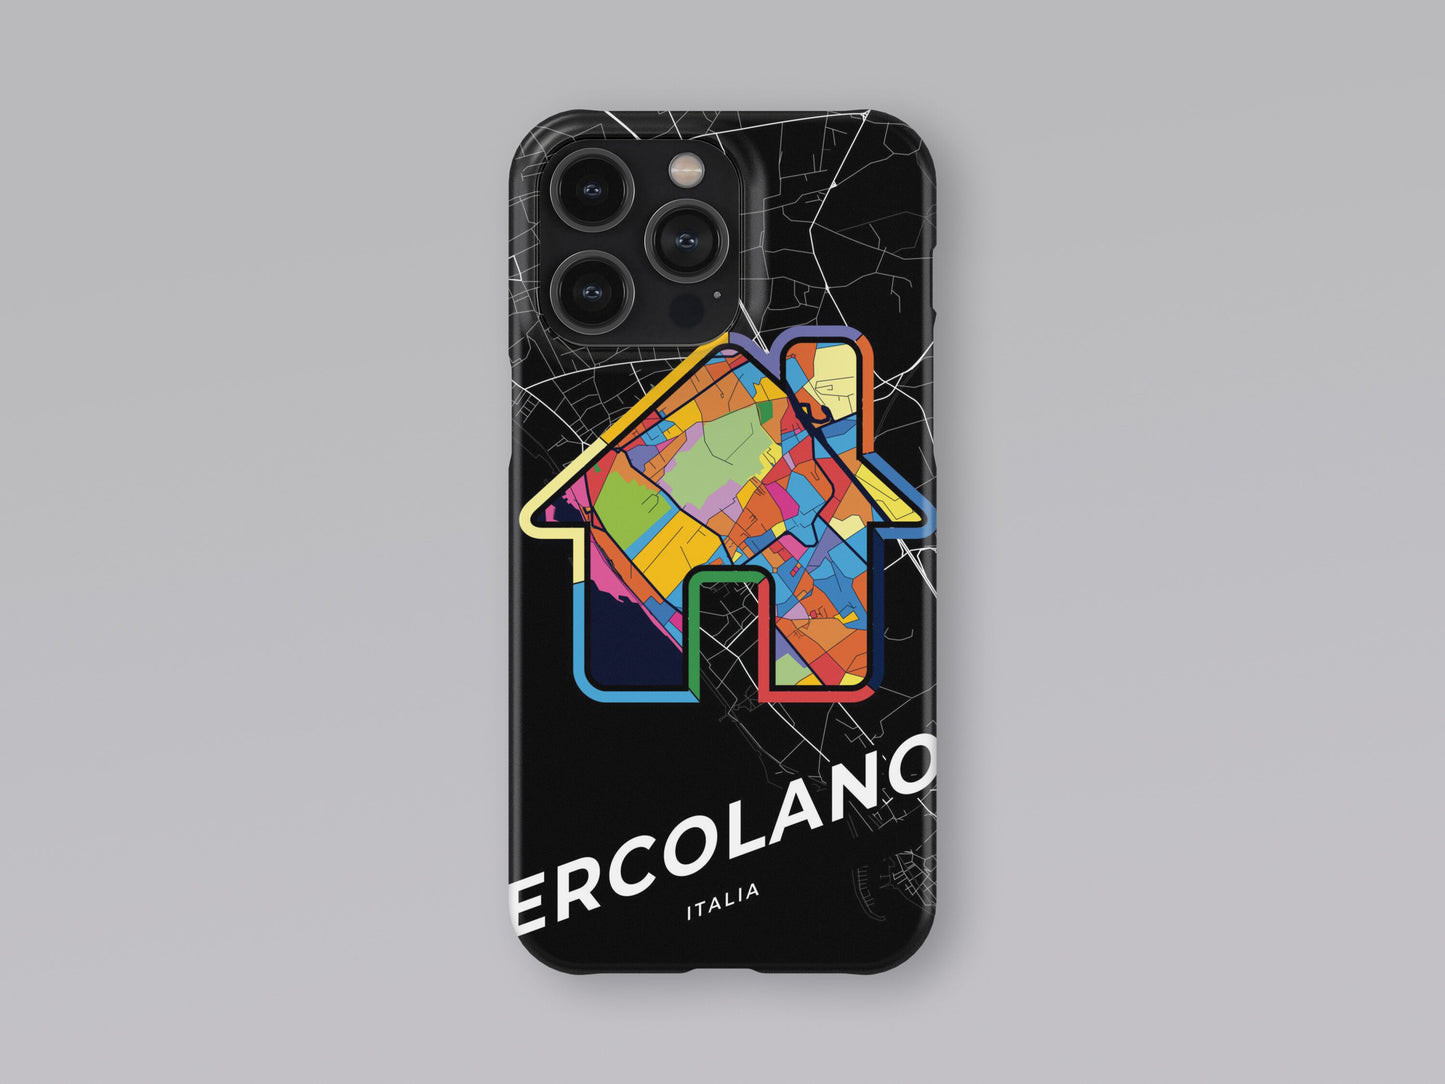 Ercolano Italy slim phone case with colorful icon. Birthday, wedding or housewarming gift. Couple match cases. 3